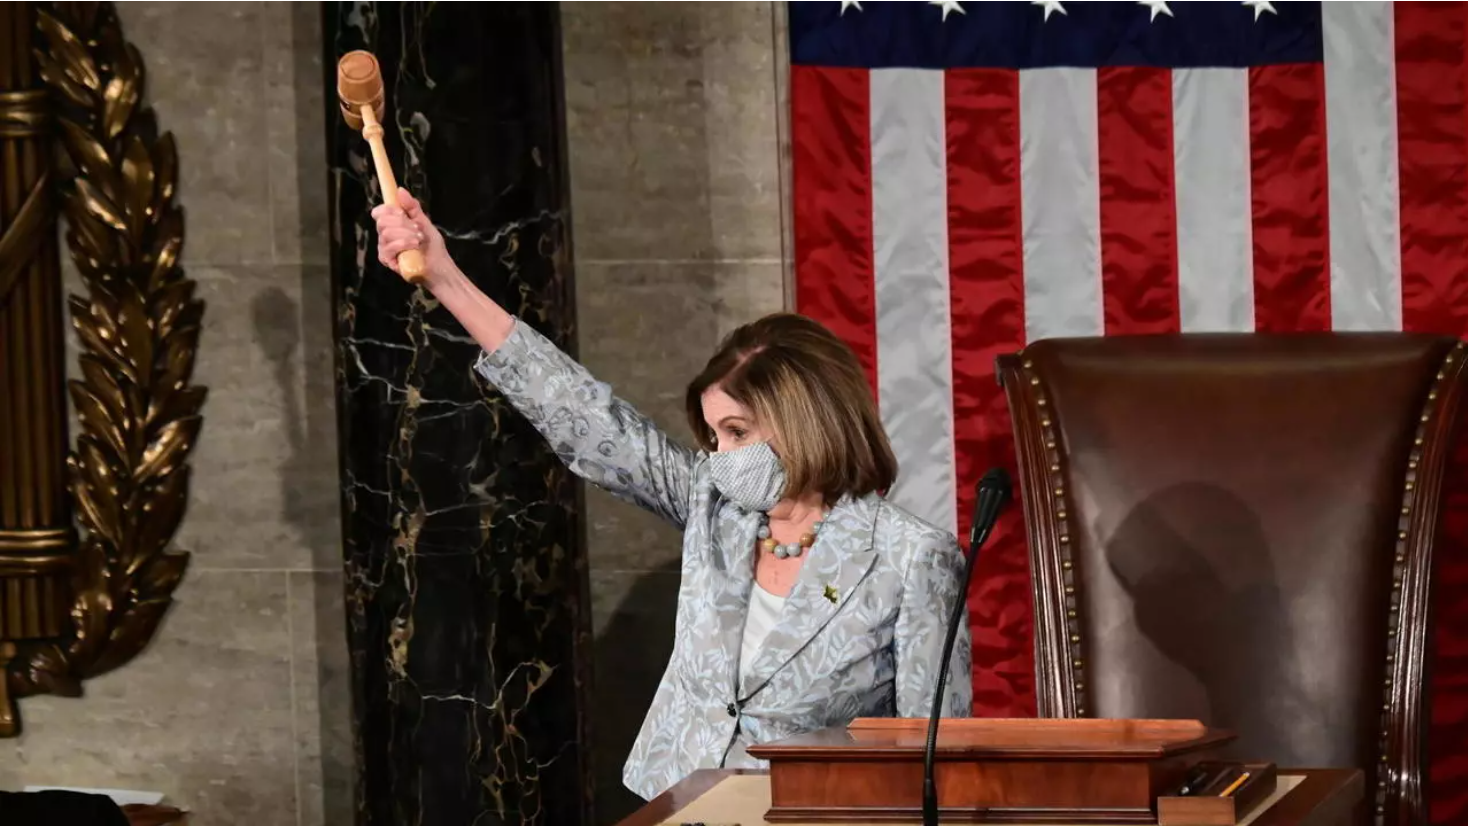 U.S. Speaker of the House Nancy Pelosi wields the Speaker's gavel after being re-elected as Speaker of the 117th House of Representatives in Washington, U.S., January 3, 2021. © REUTERS/Erin Scott/Pool